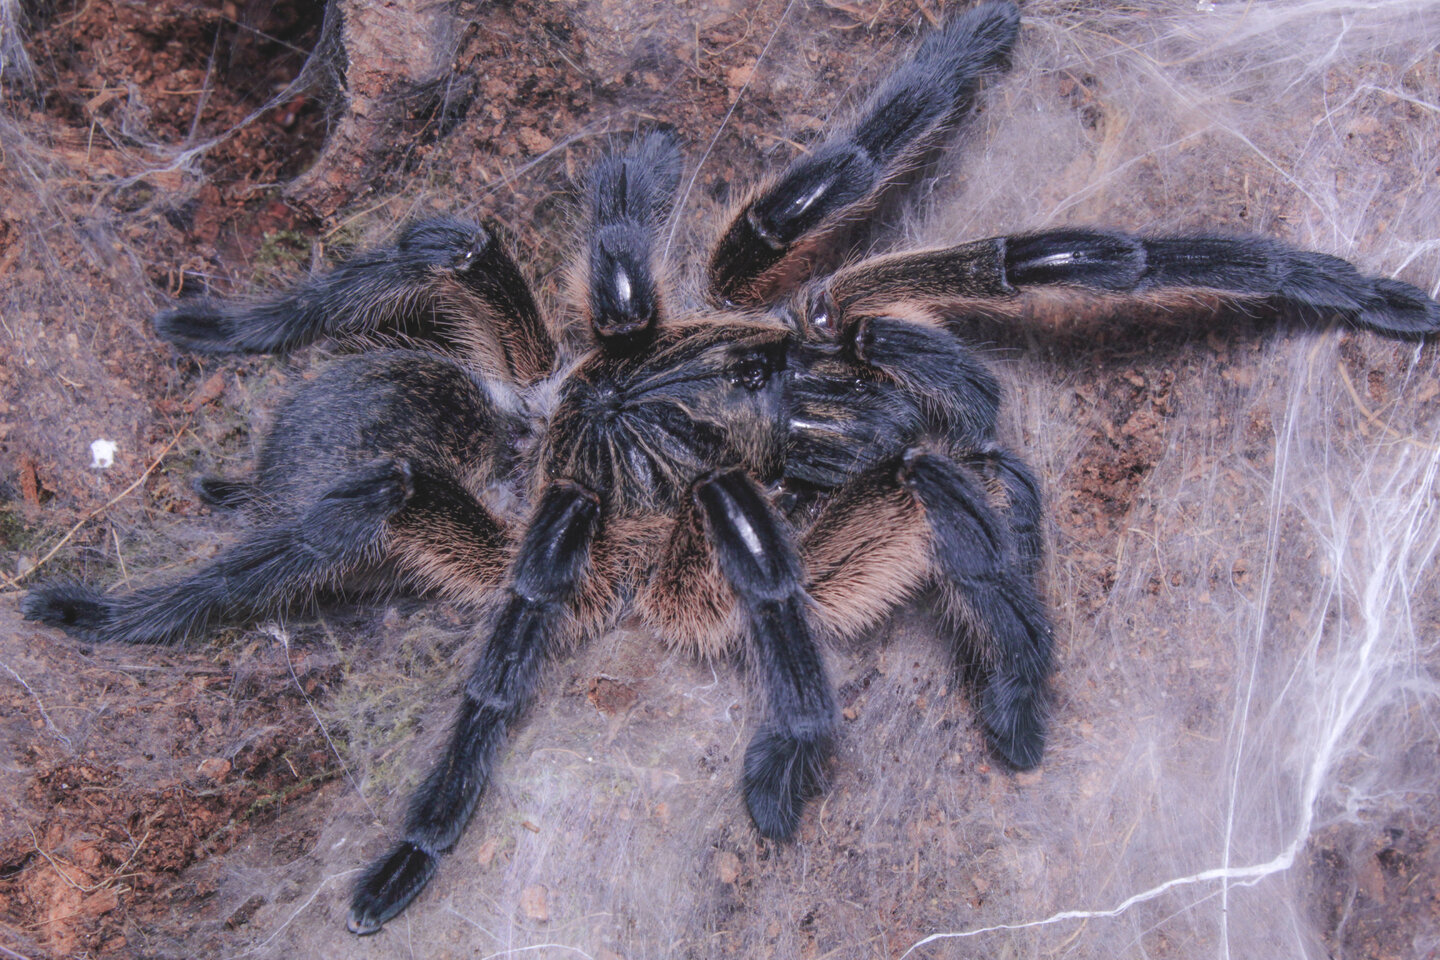 H.pulchripes 0.1 (5 inches) - Post molt